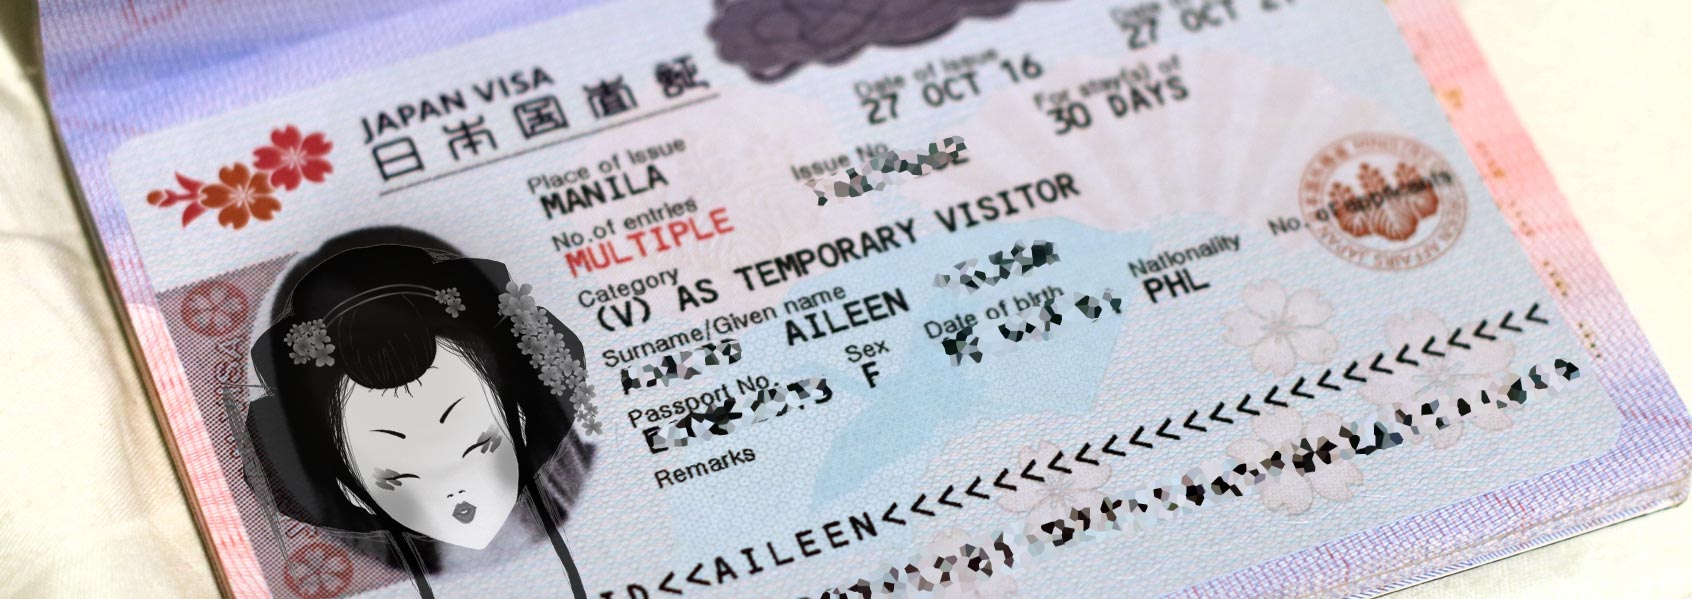 Updated How To Apply For Single Multiple Entry Japan Visa For